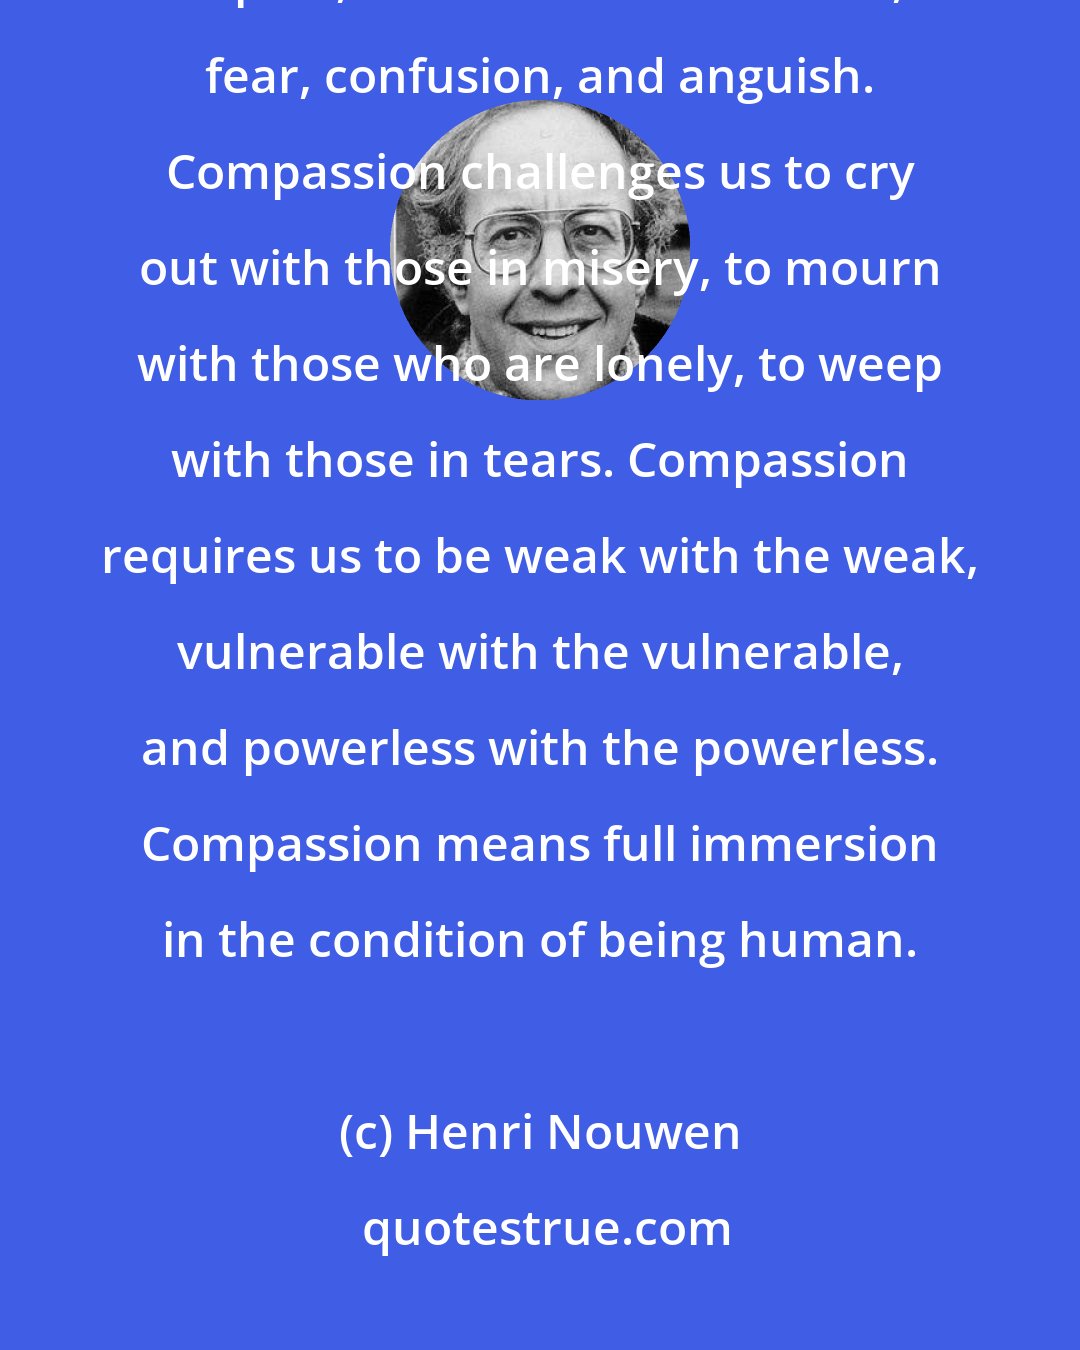 Henri Nouwen: Compassion asks us to go where it hurts, to enter into the places of pain, to share in brokenness, fear, confusion, and anguish. Compassion challenges us to cry out with those in misery, to mourn with those who are lonely, to weep with those in tears. Compassion requires us to be weak with the weak, vulnerable with the vulnerable, and powerless with the powerless. Compassion means full immersion in the condition of being human.